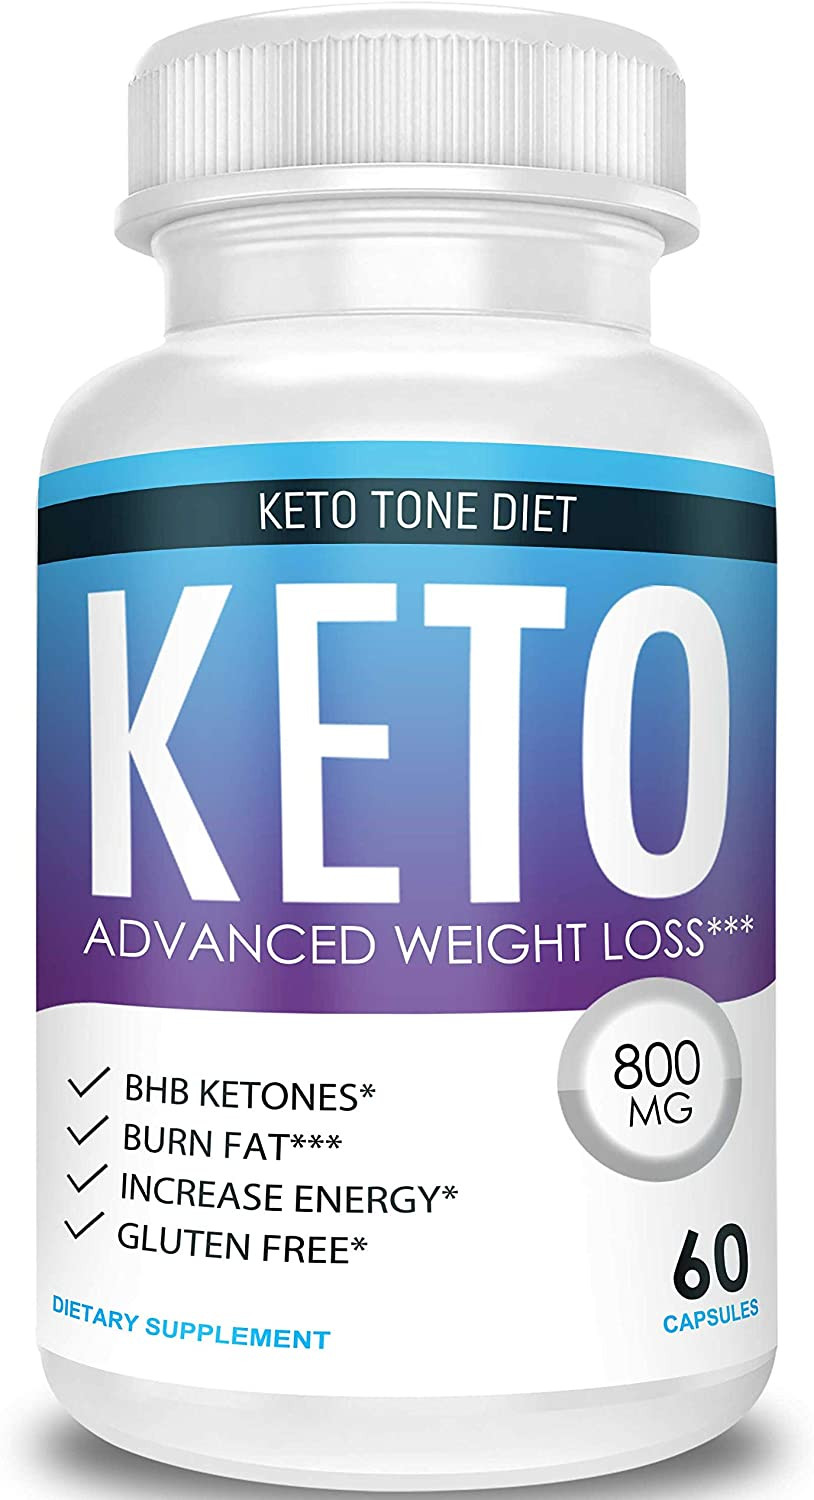 Keto Tone Diet Reviews
 Keto Tone Review [2019 Updated] A Product from Real